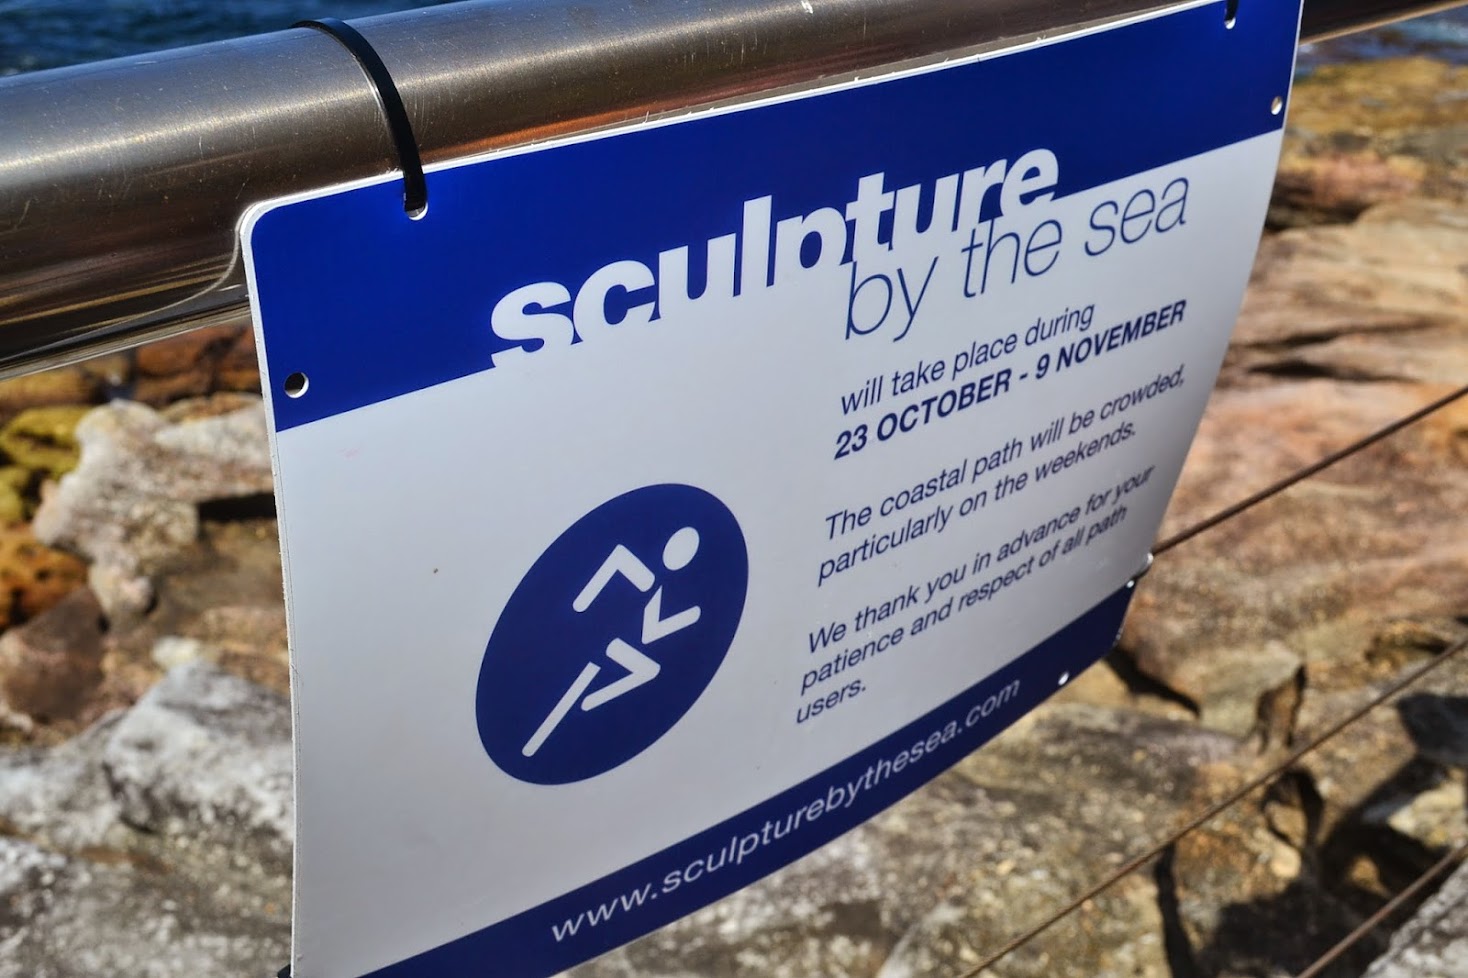 Sculpture by the sea 2014